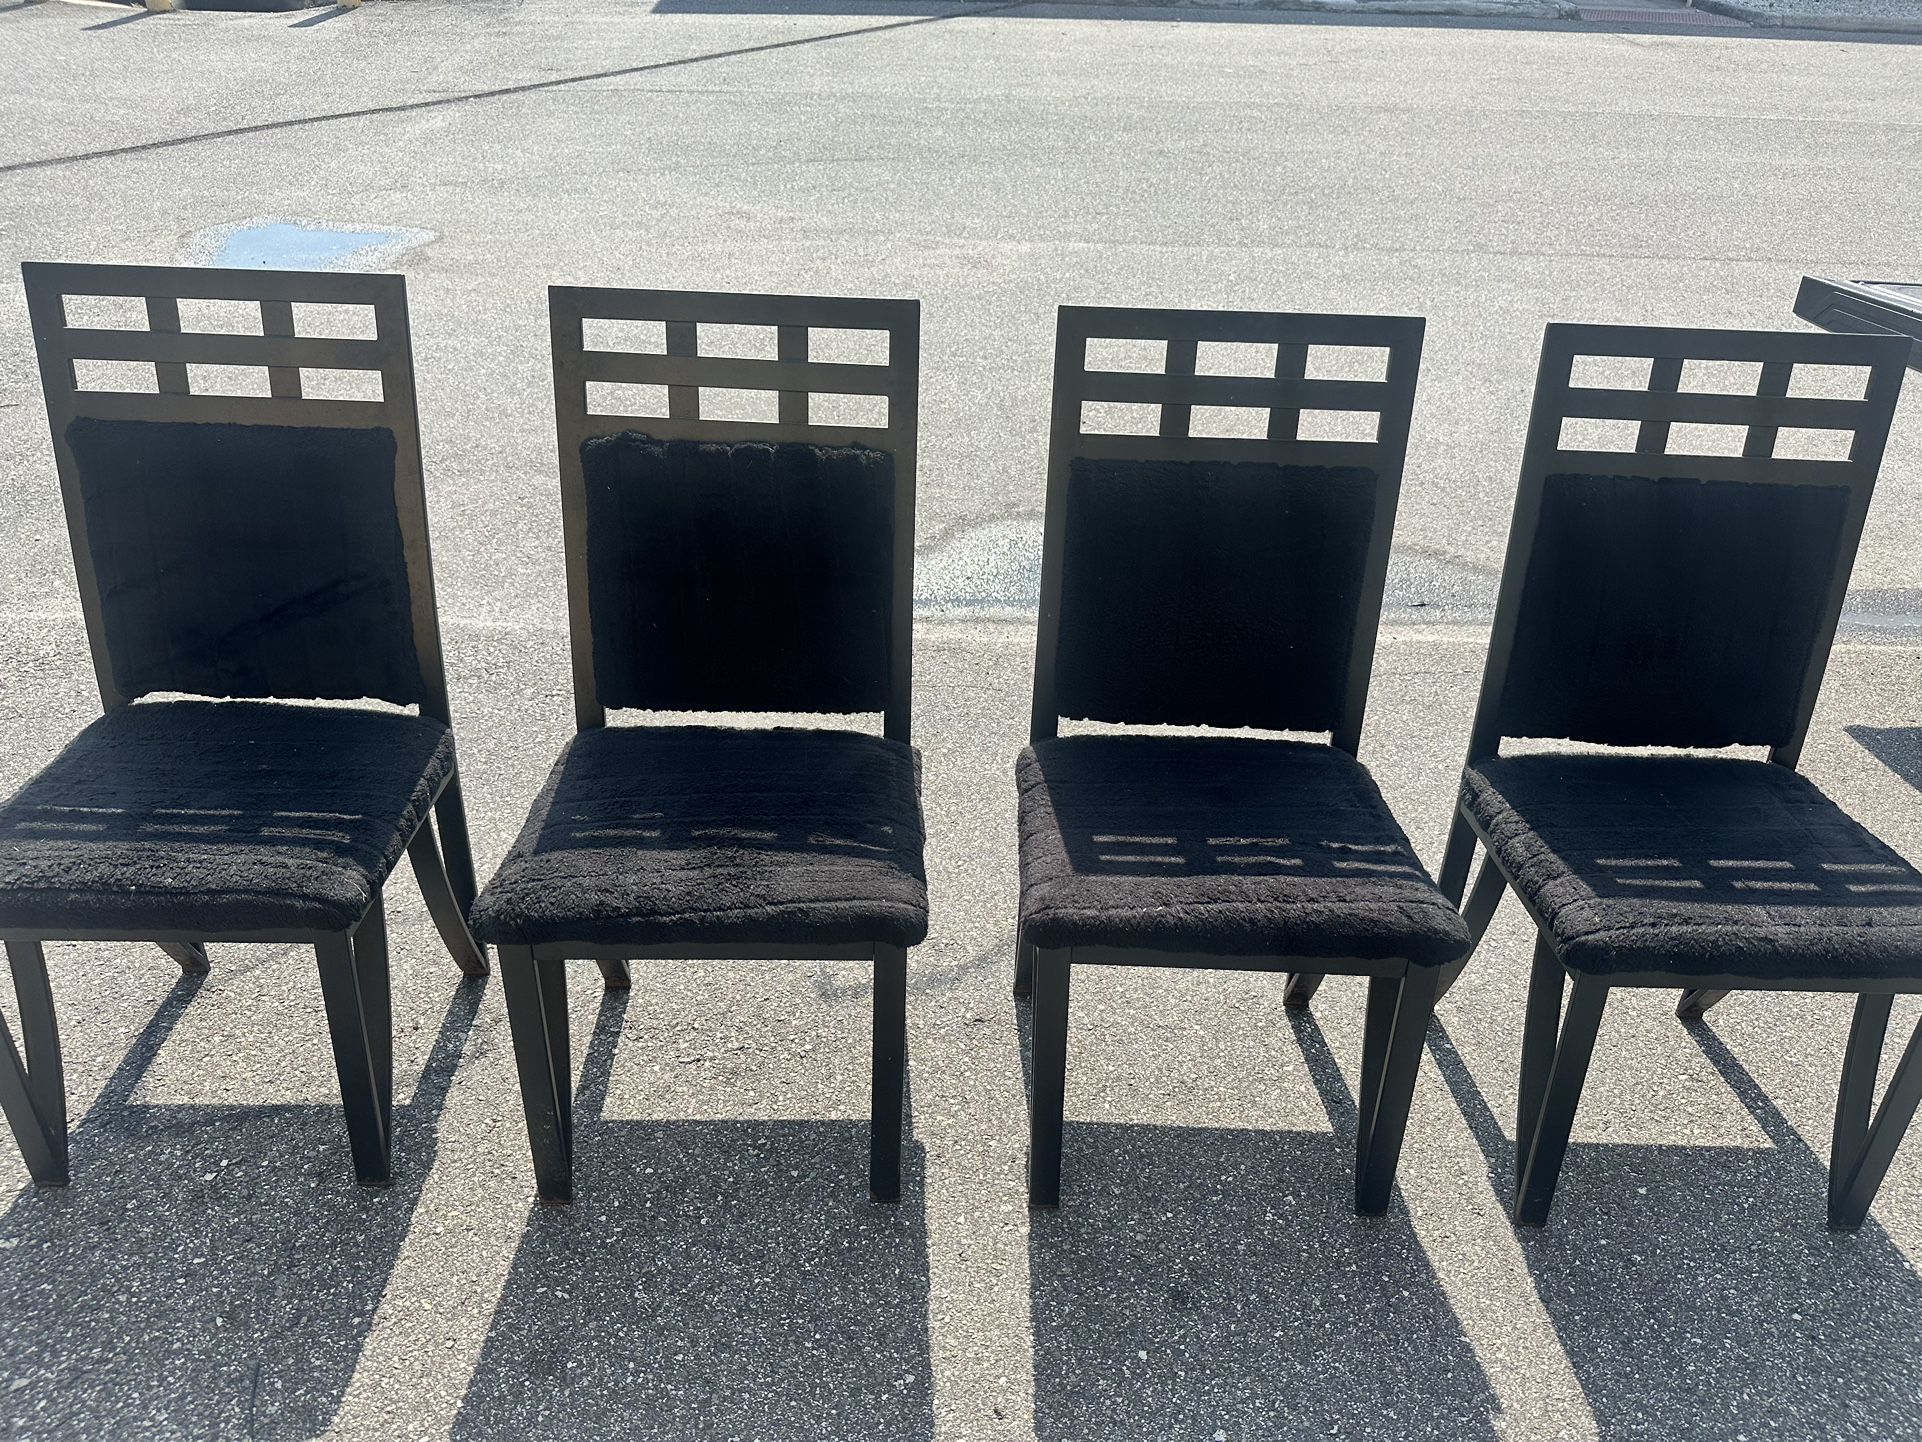 Black Dining Chairs 